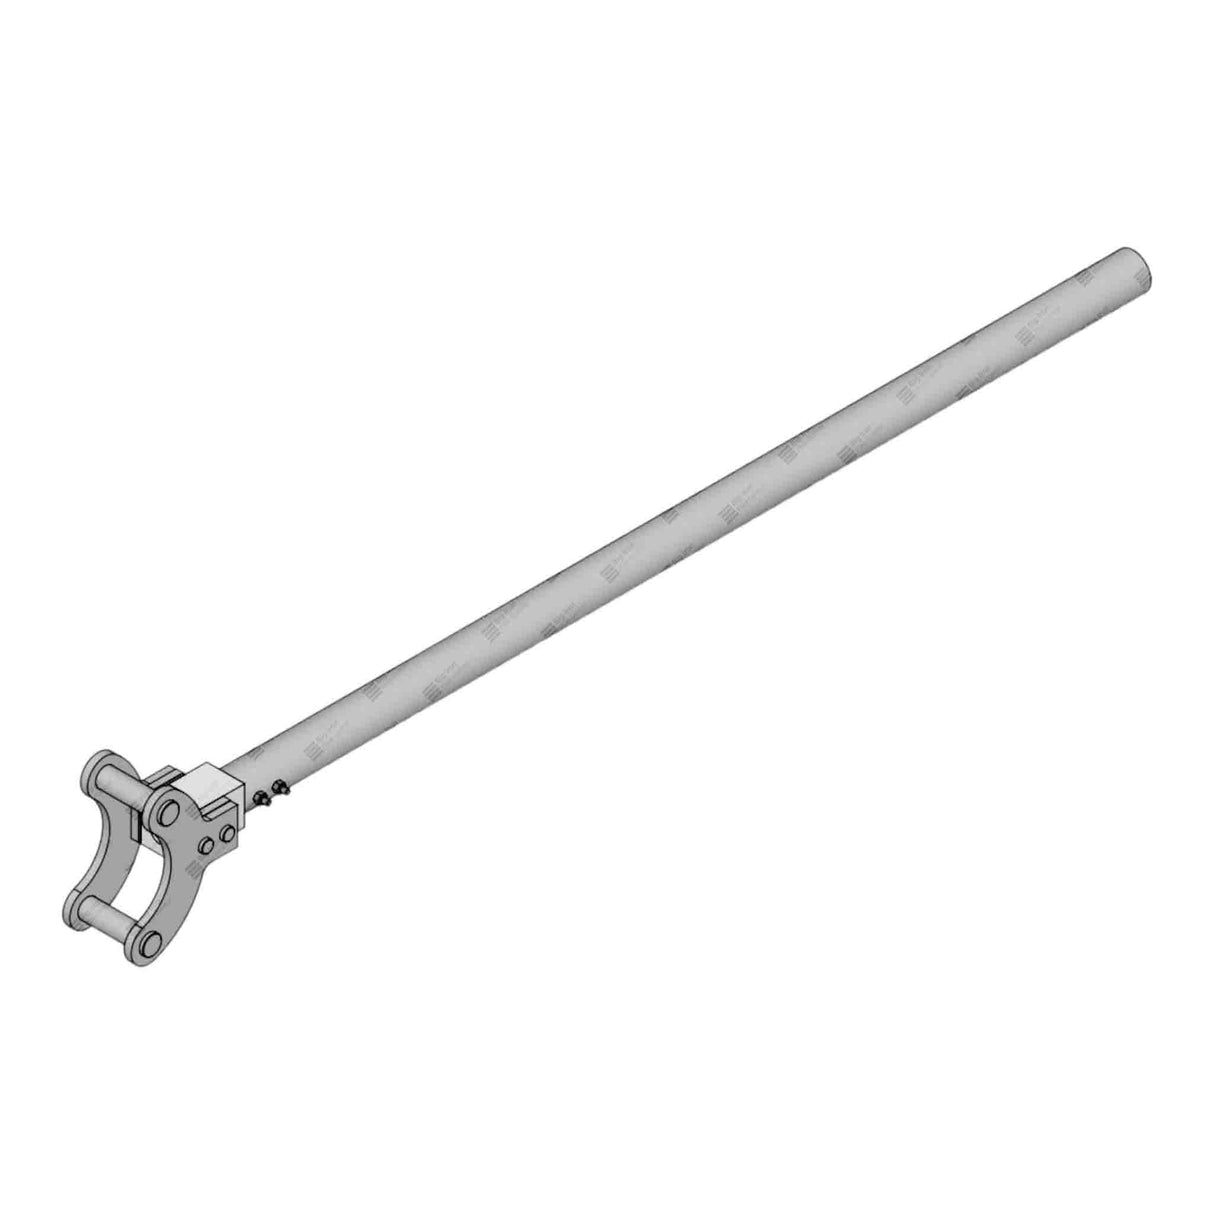 Wing Nut Wrench, 4" 206, 4 FT